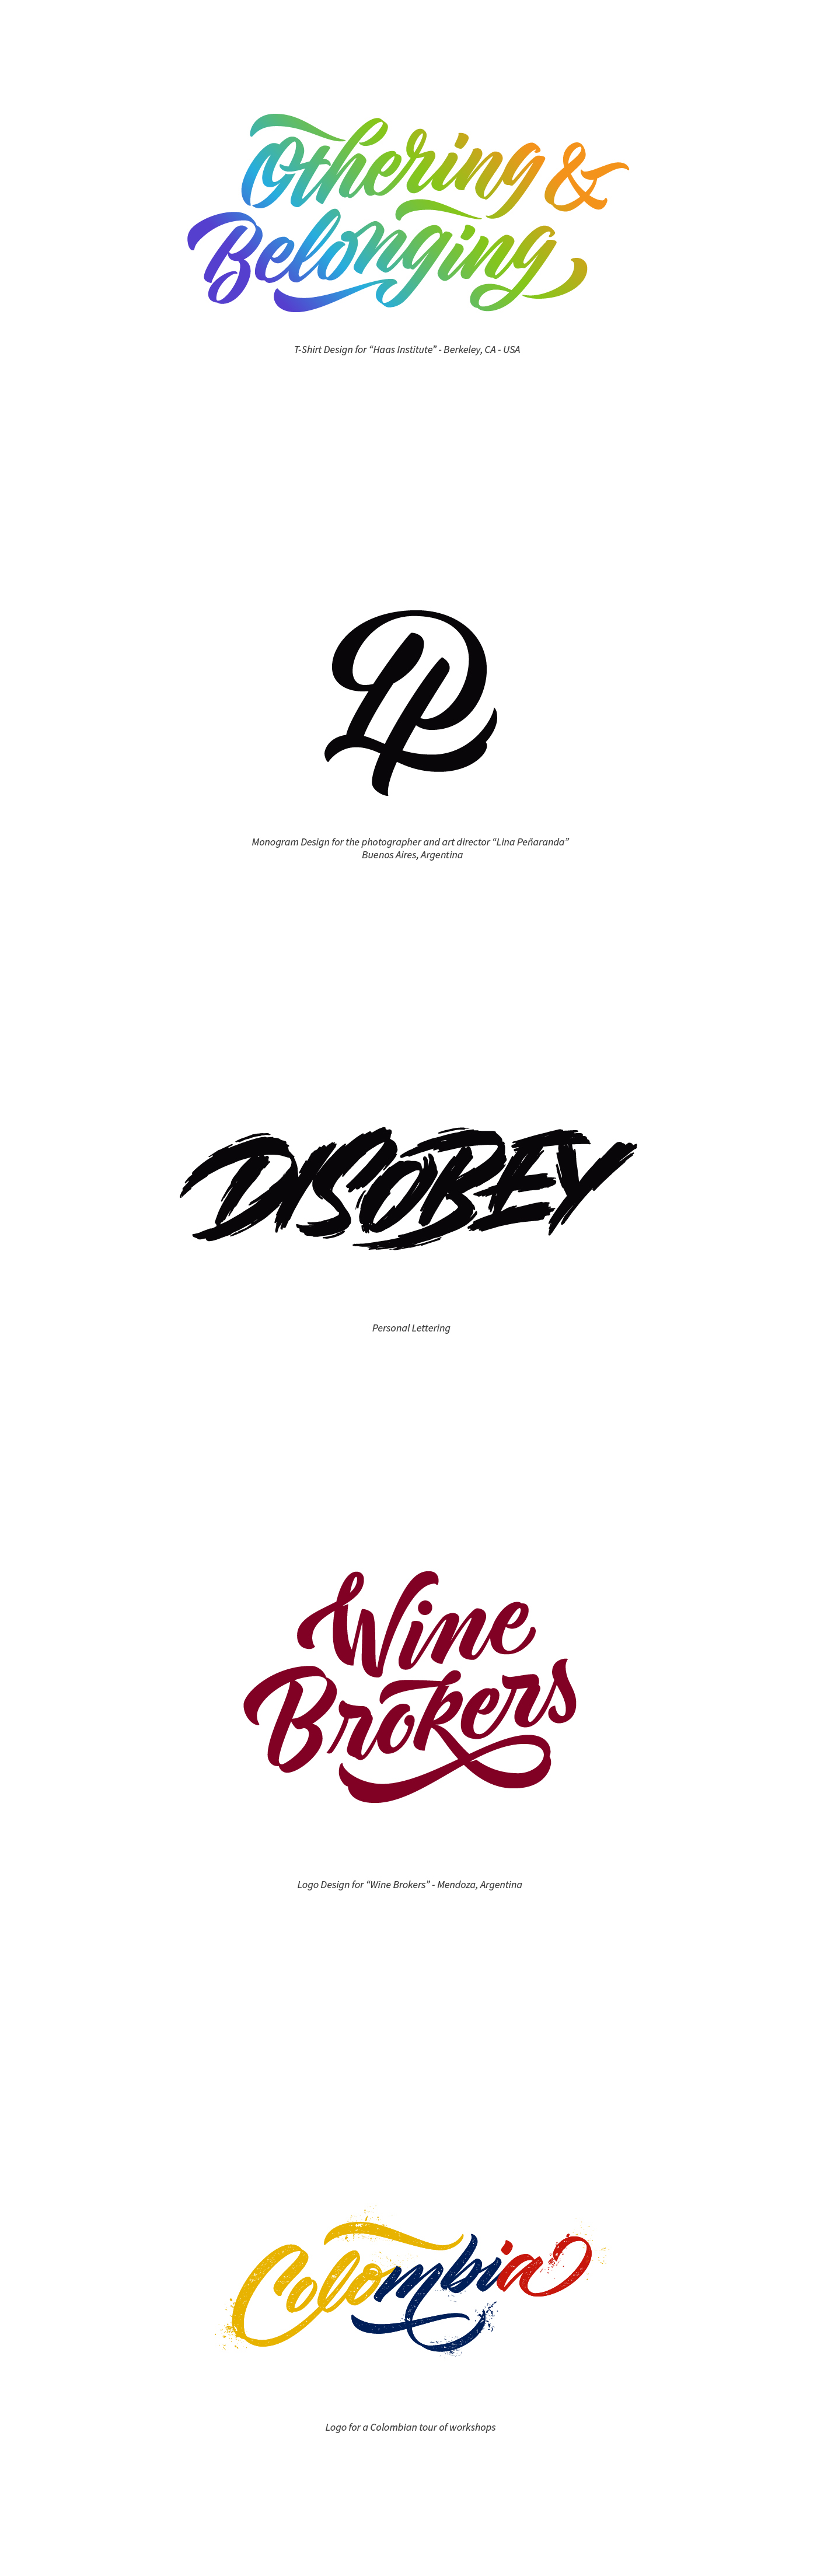 logo logos Logotype lettering Hot Dogs dissobey colombia buenos aires tattoo